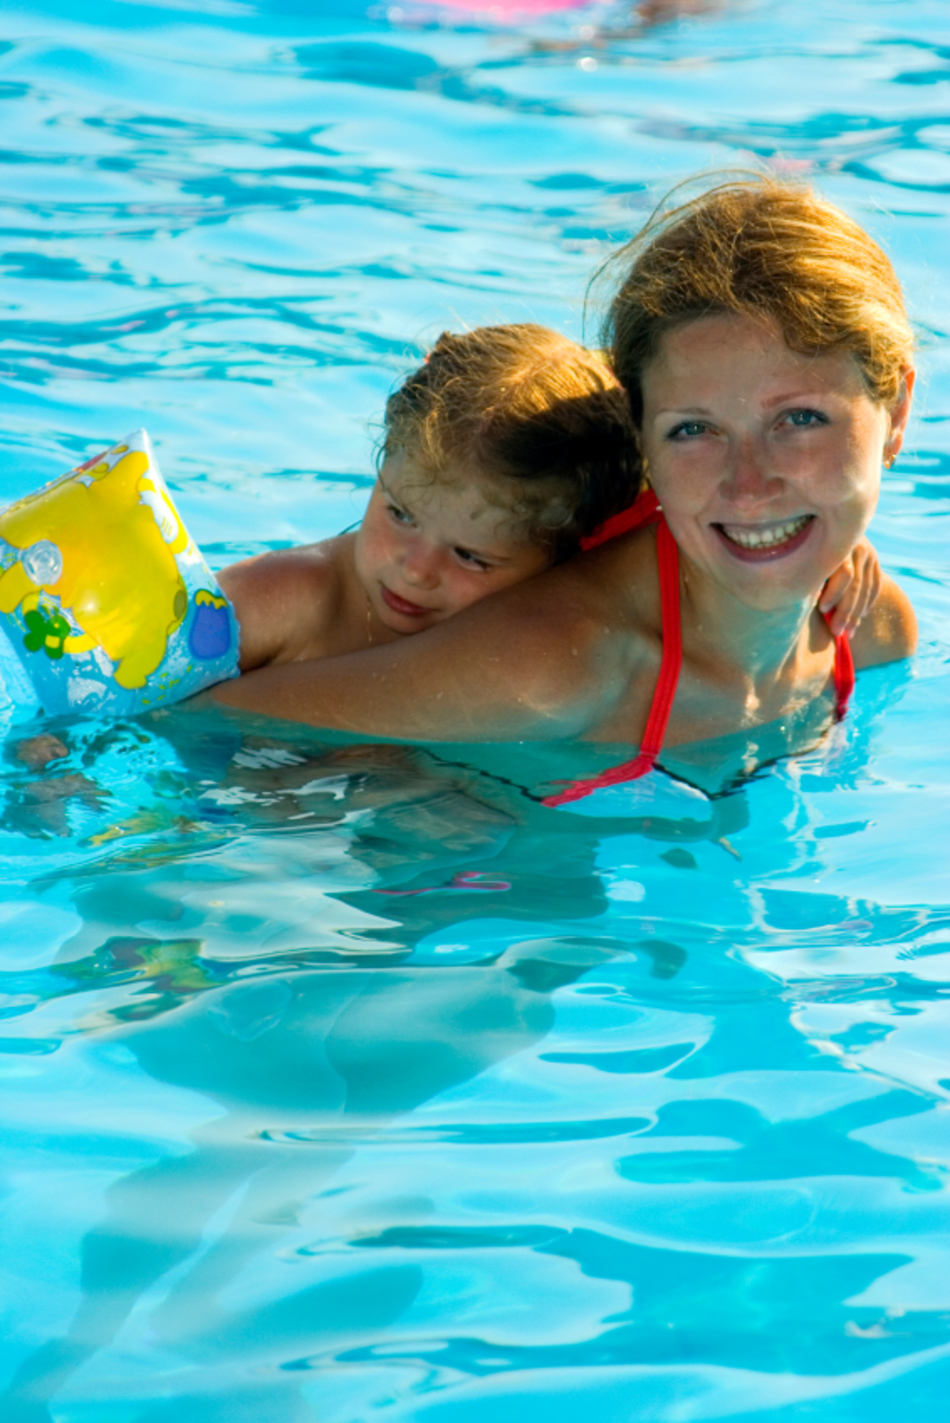 Should I Be Worried About My Child “Dry Drowning?”